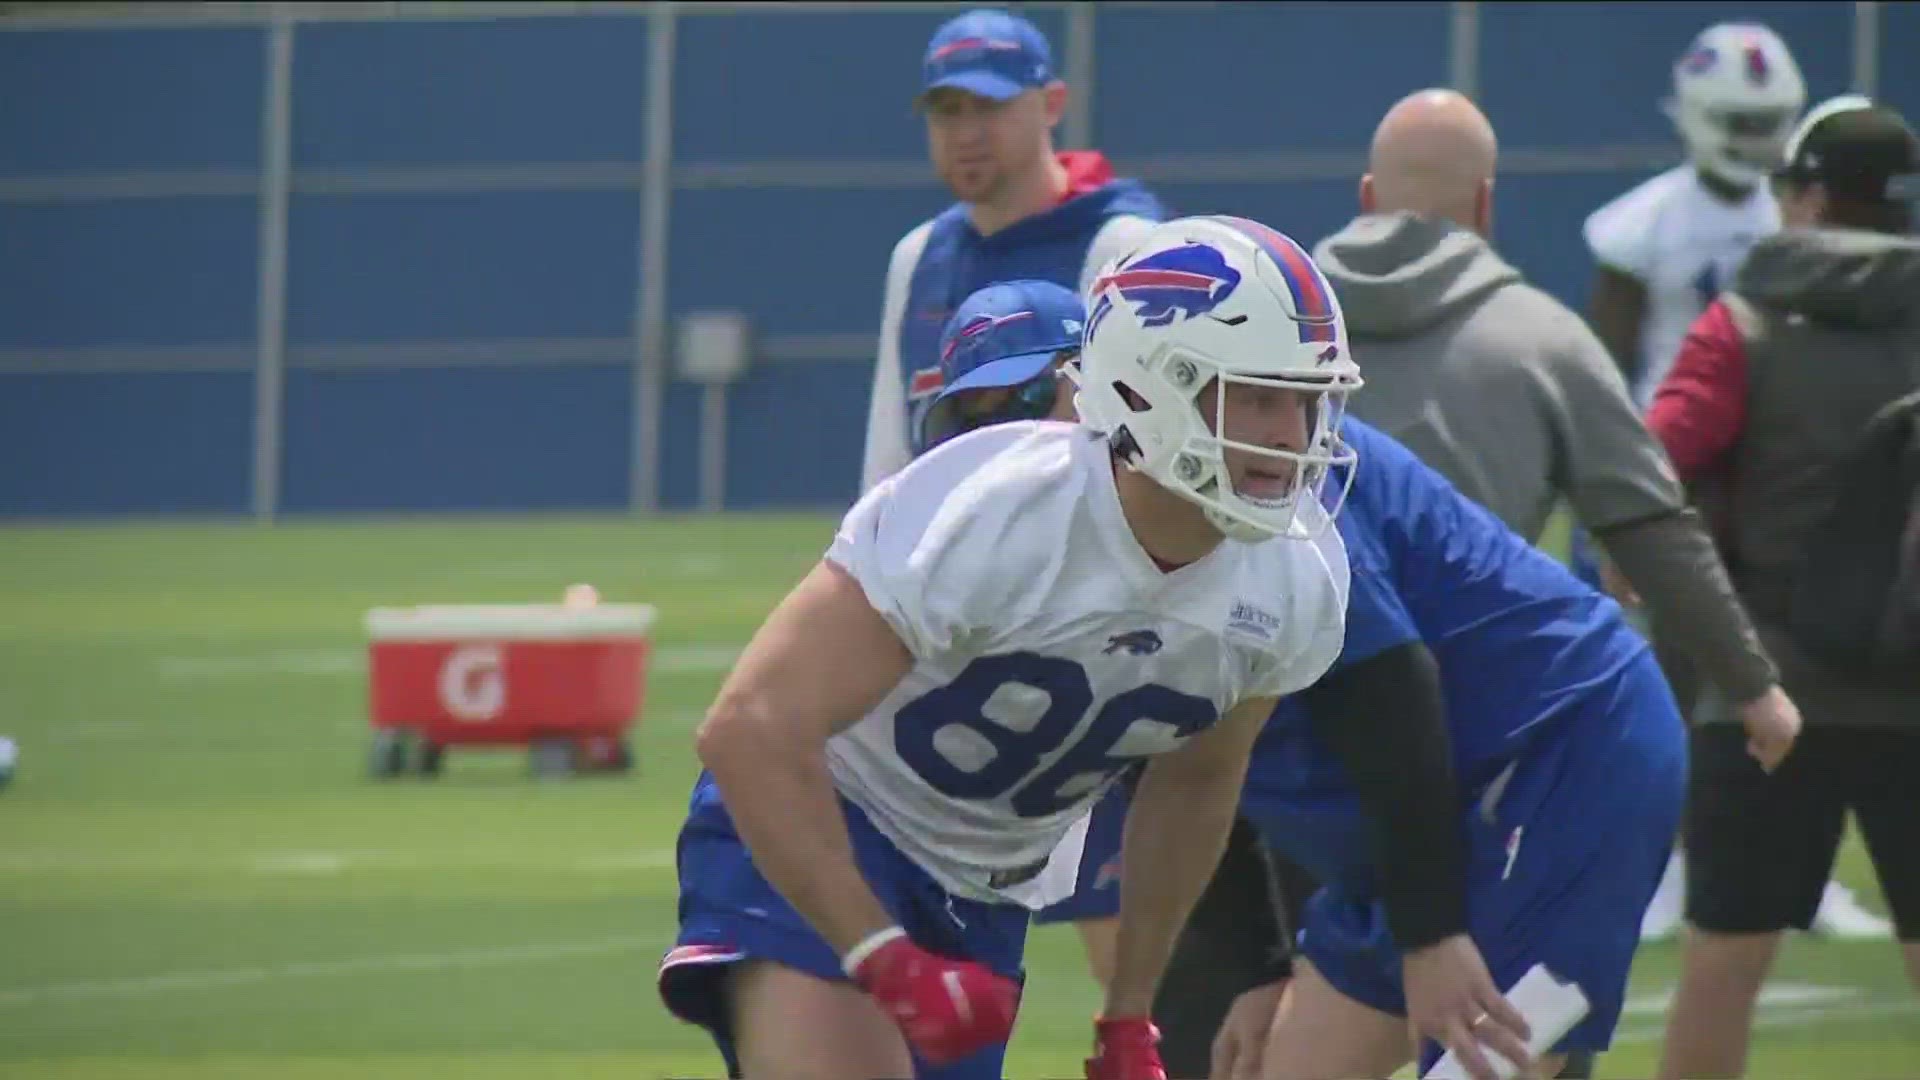 The Bills draft class, free agents, and tryouts are hitting the field this weekend in Orchard Park.